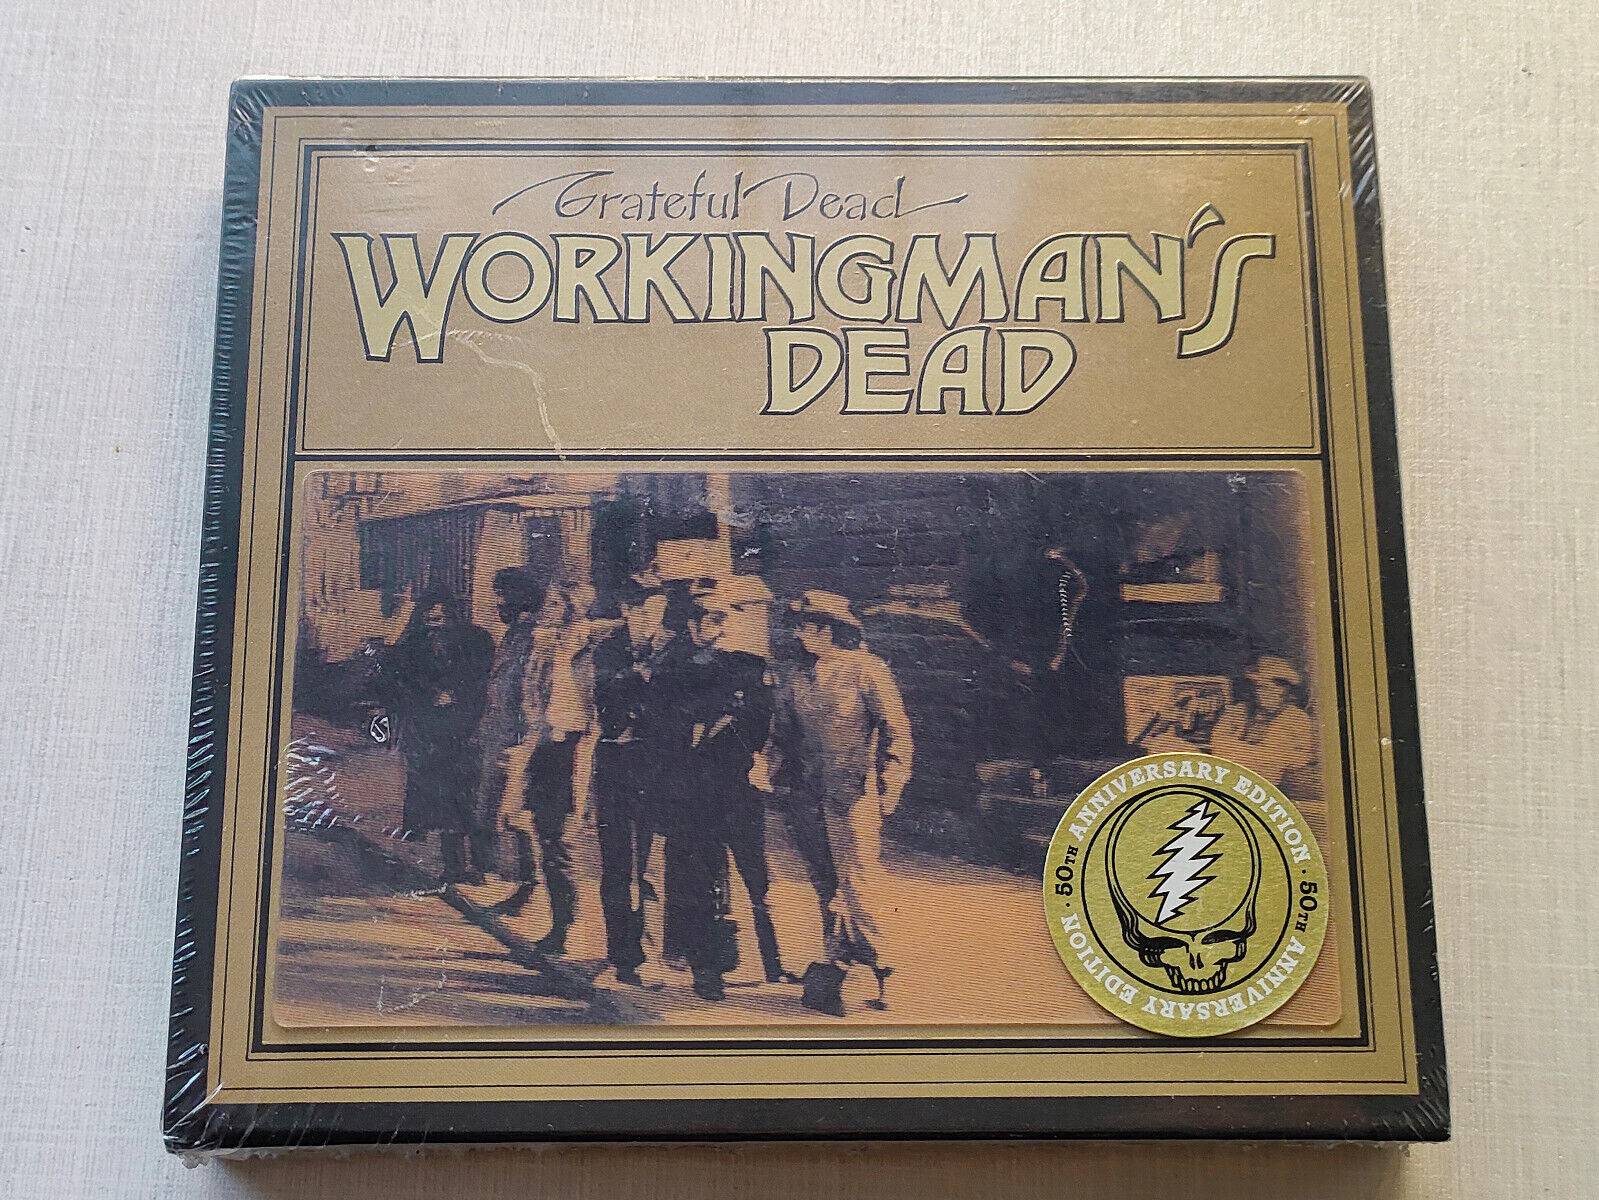 Workingman's Dead (50th Anniversary Dlx Edition) by The Grateful Dead (3CD,2020)